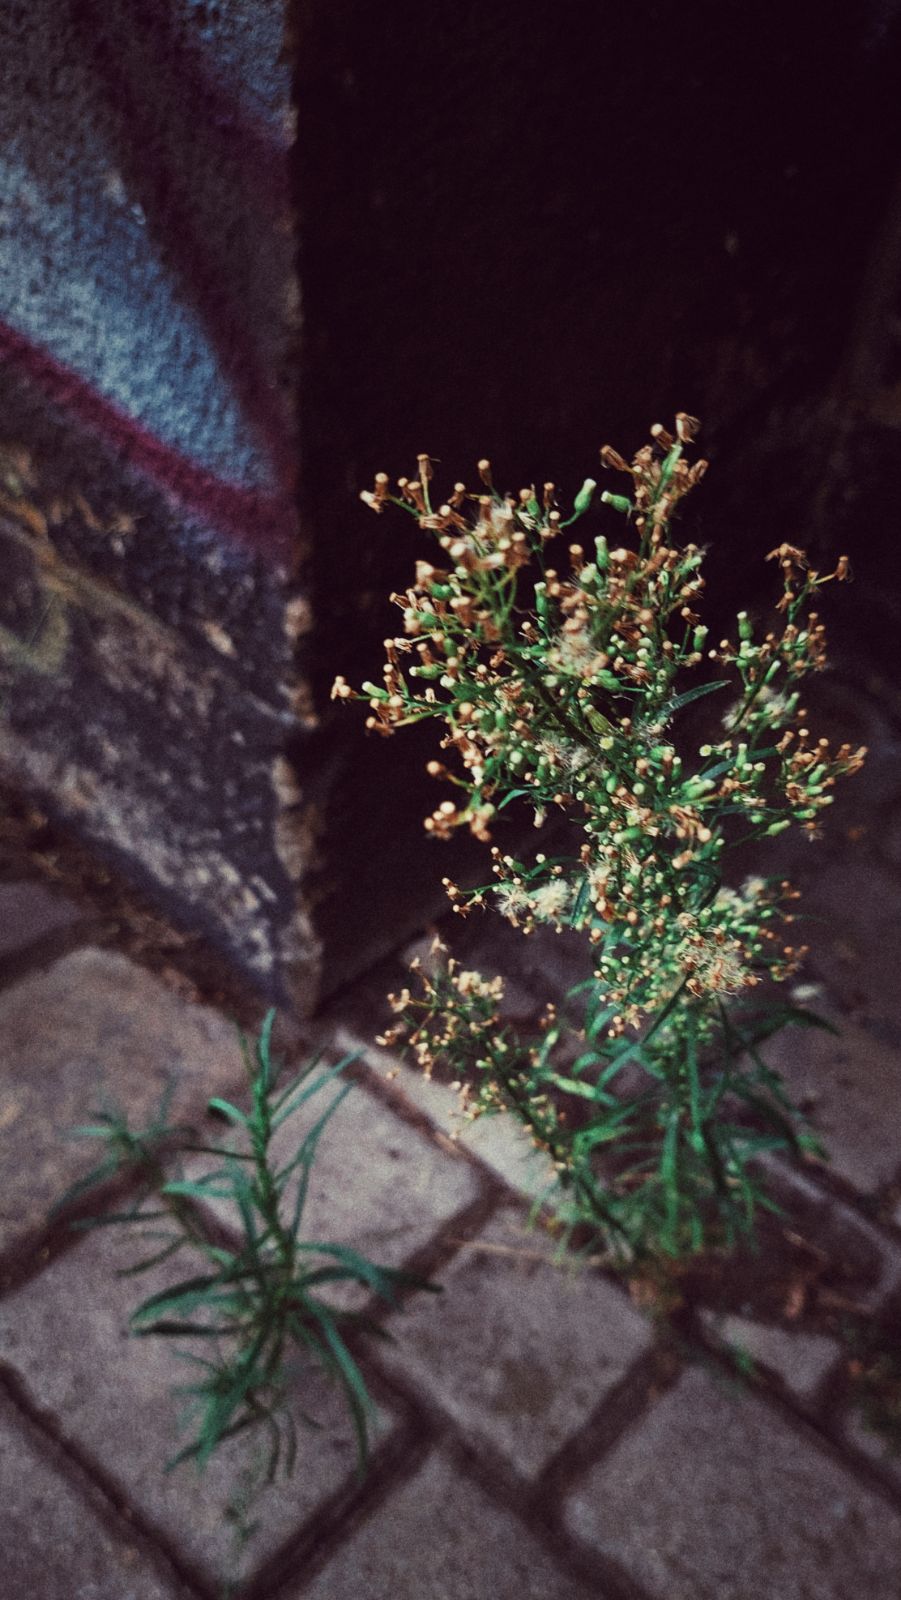 A random street plant close to a wall corner, decorated with traces,of graffiti colour.